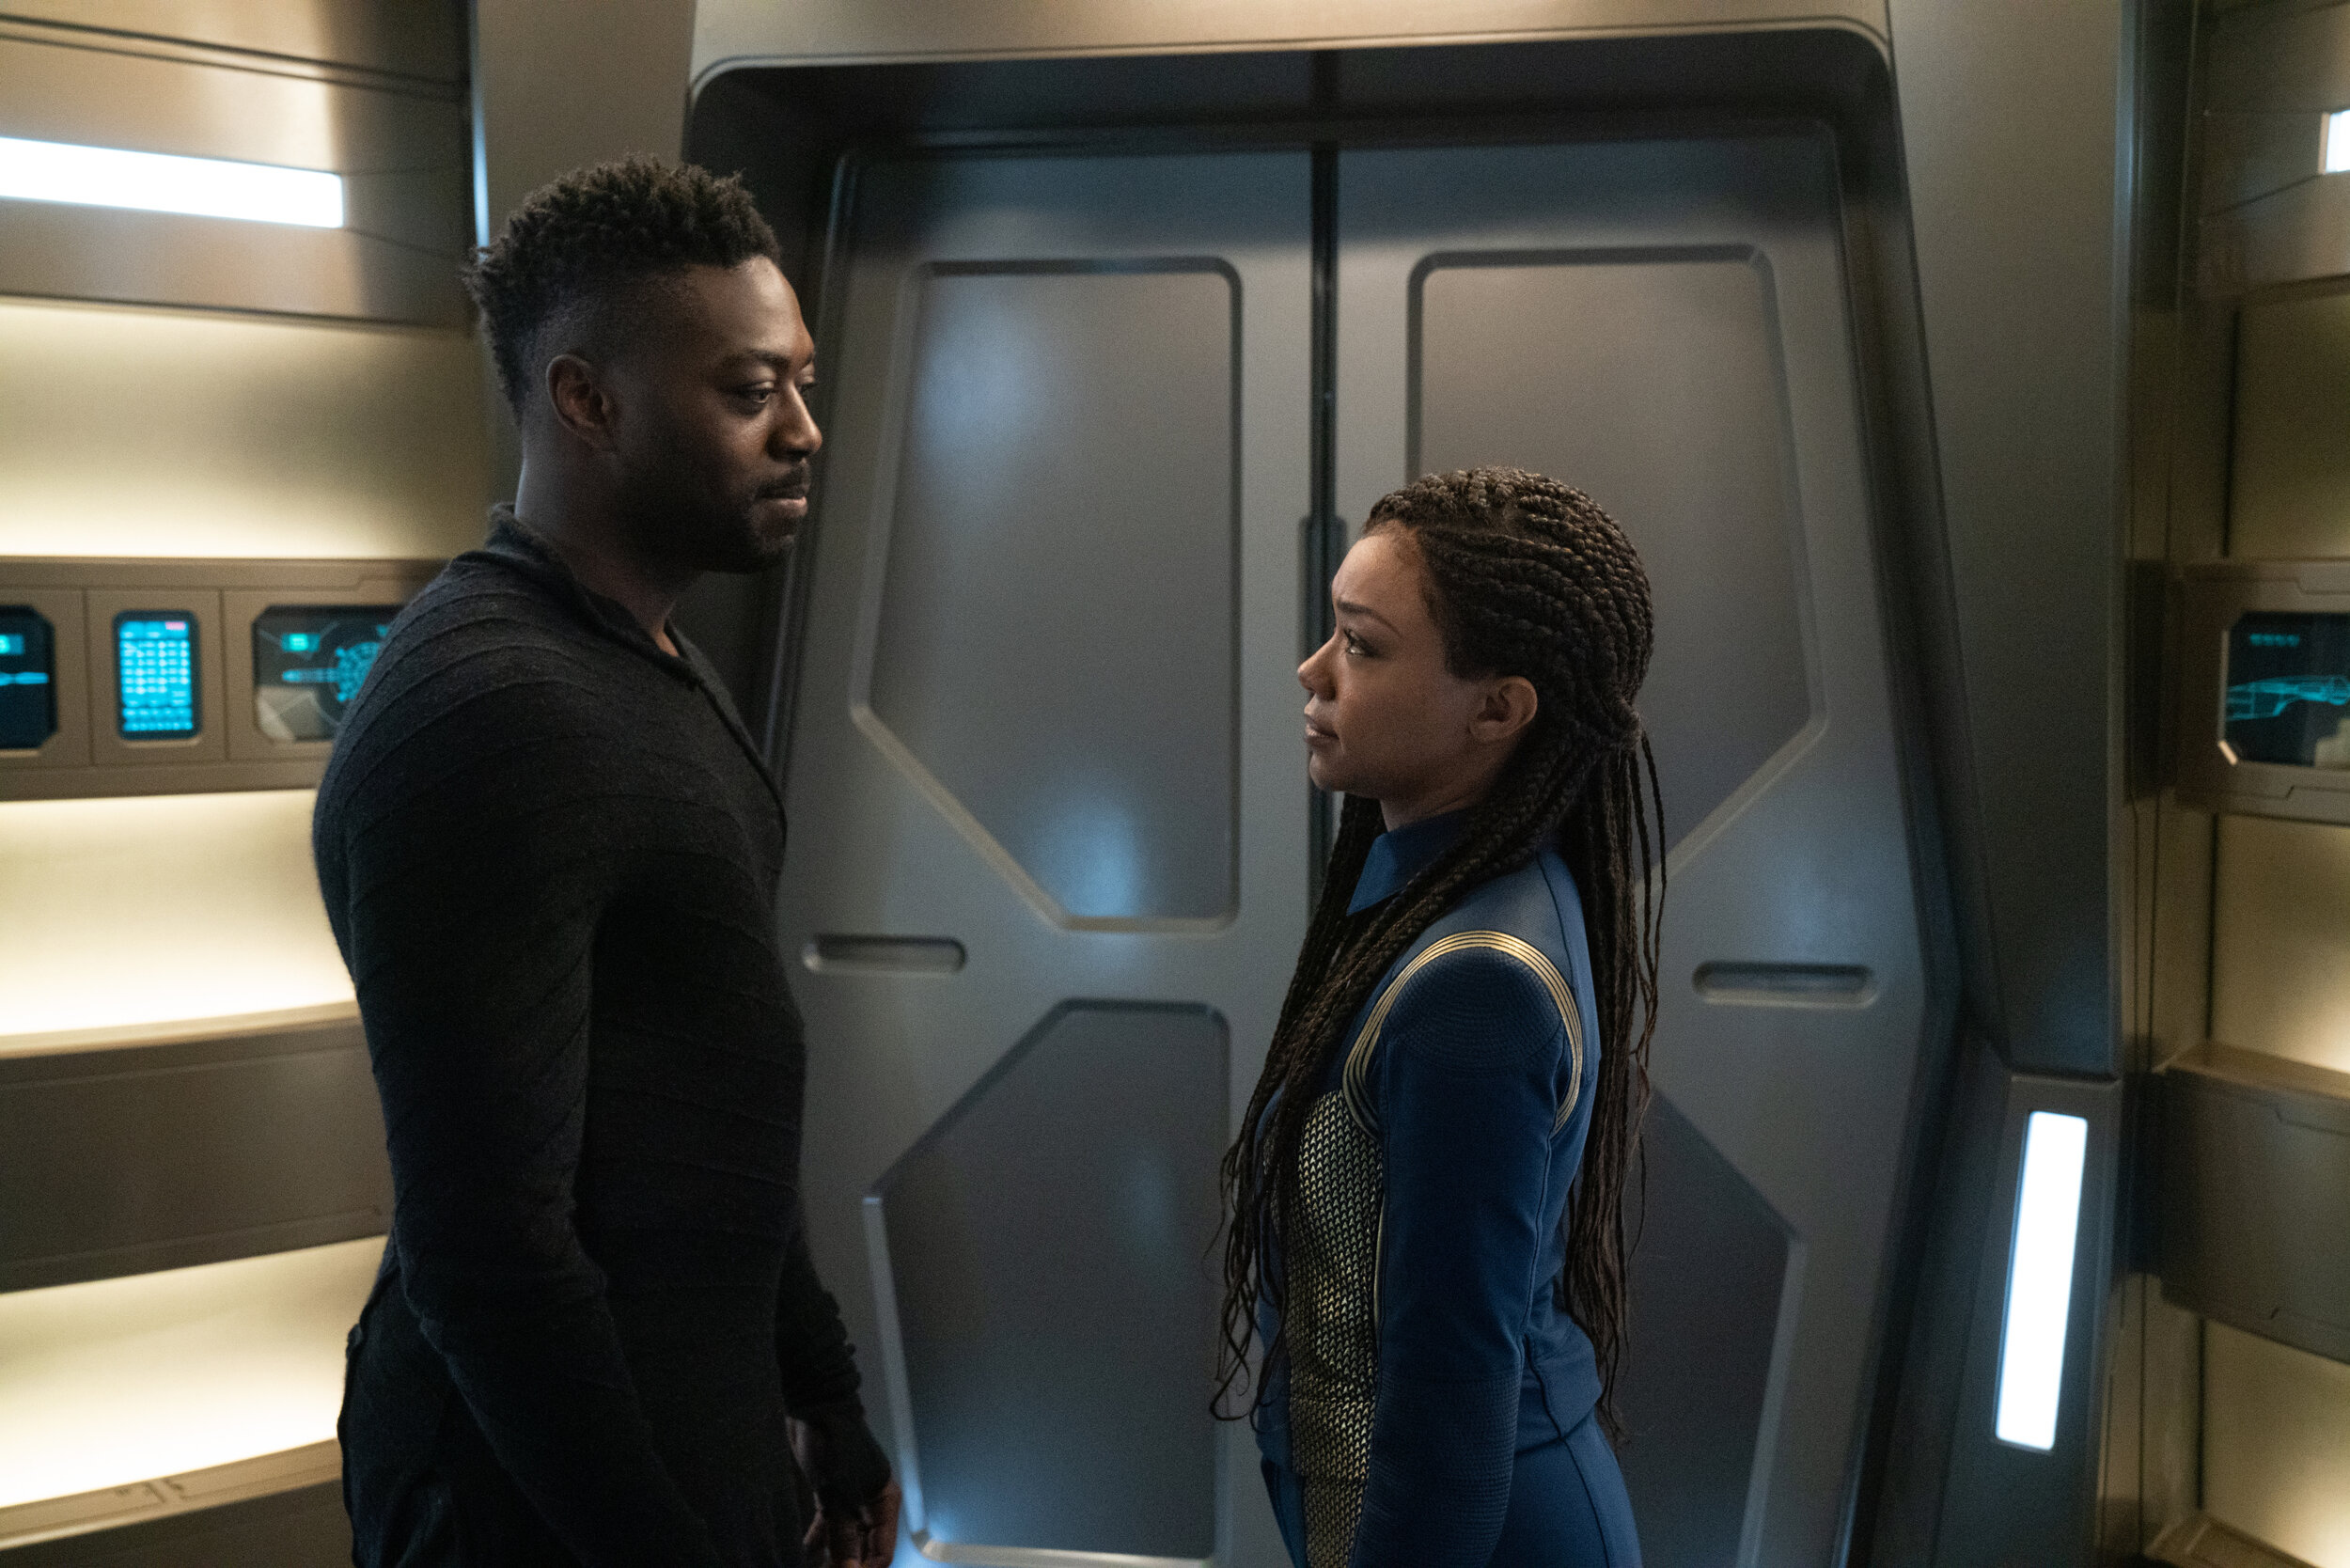   "Scavengers" -- Ep#306 -- Pictured: David Ajala as Book and Sonequa Martin-Green as Burnham of the CBS All Access series STAR TREK: DISCOVERY. Photo Cr: Michael Gibson/CBS ©2020 CBS Interactive, Inc. All Rights Reserved.  